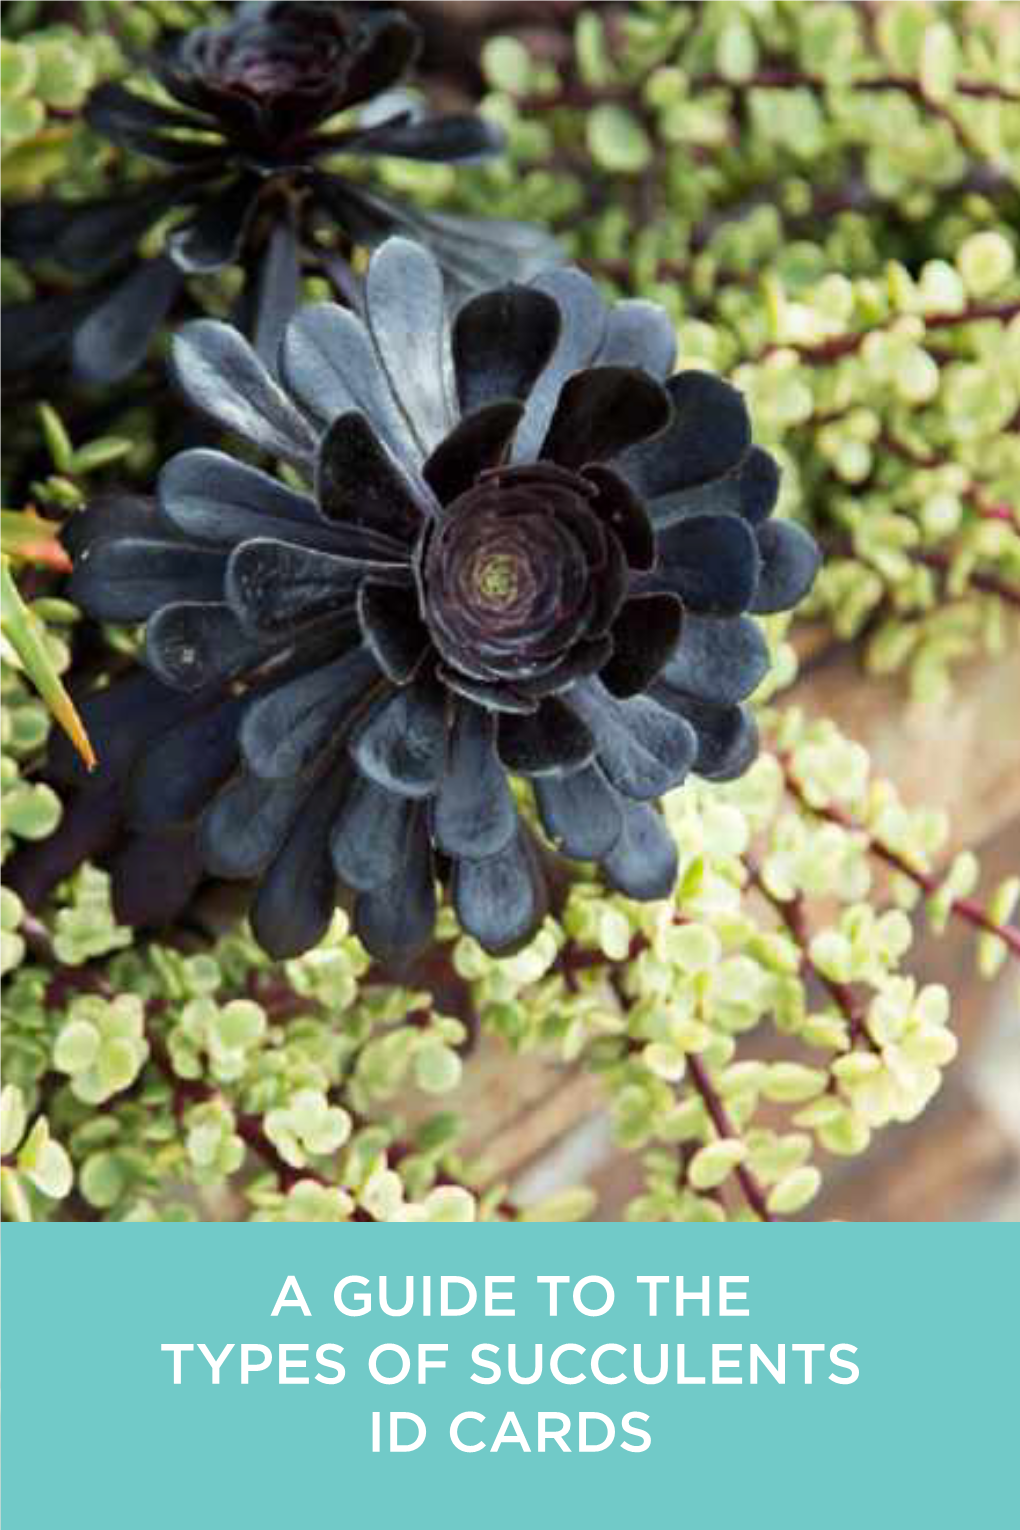 A Guide to the Types of Succulents Id Cards © 2020 © Succulents Llc Sunshine, and Rights All Reserved